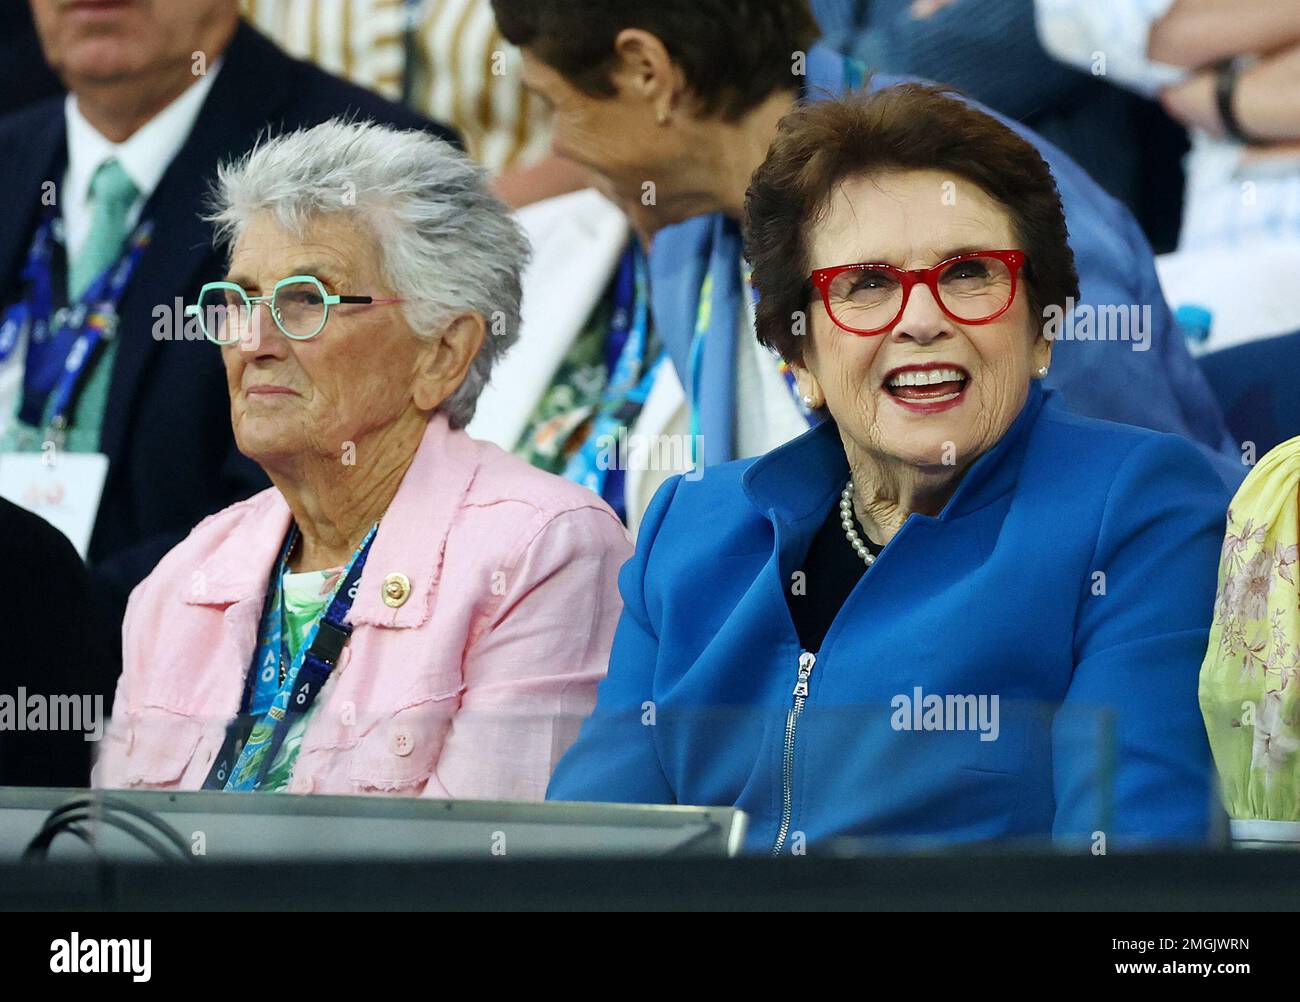 Tennis - Australian Open - Melbourne Park, Melbourne, Australia - January 26, 2023 Former players Billie Jean King and Judy Dalton are pictured in the stands during the semi final match between Belarus’ Victoria Azarenka and Kazakhstan’s Elena Rybakina REUTERS/Hannah Mckay Stock Photo